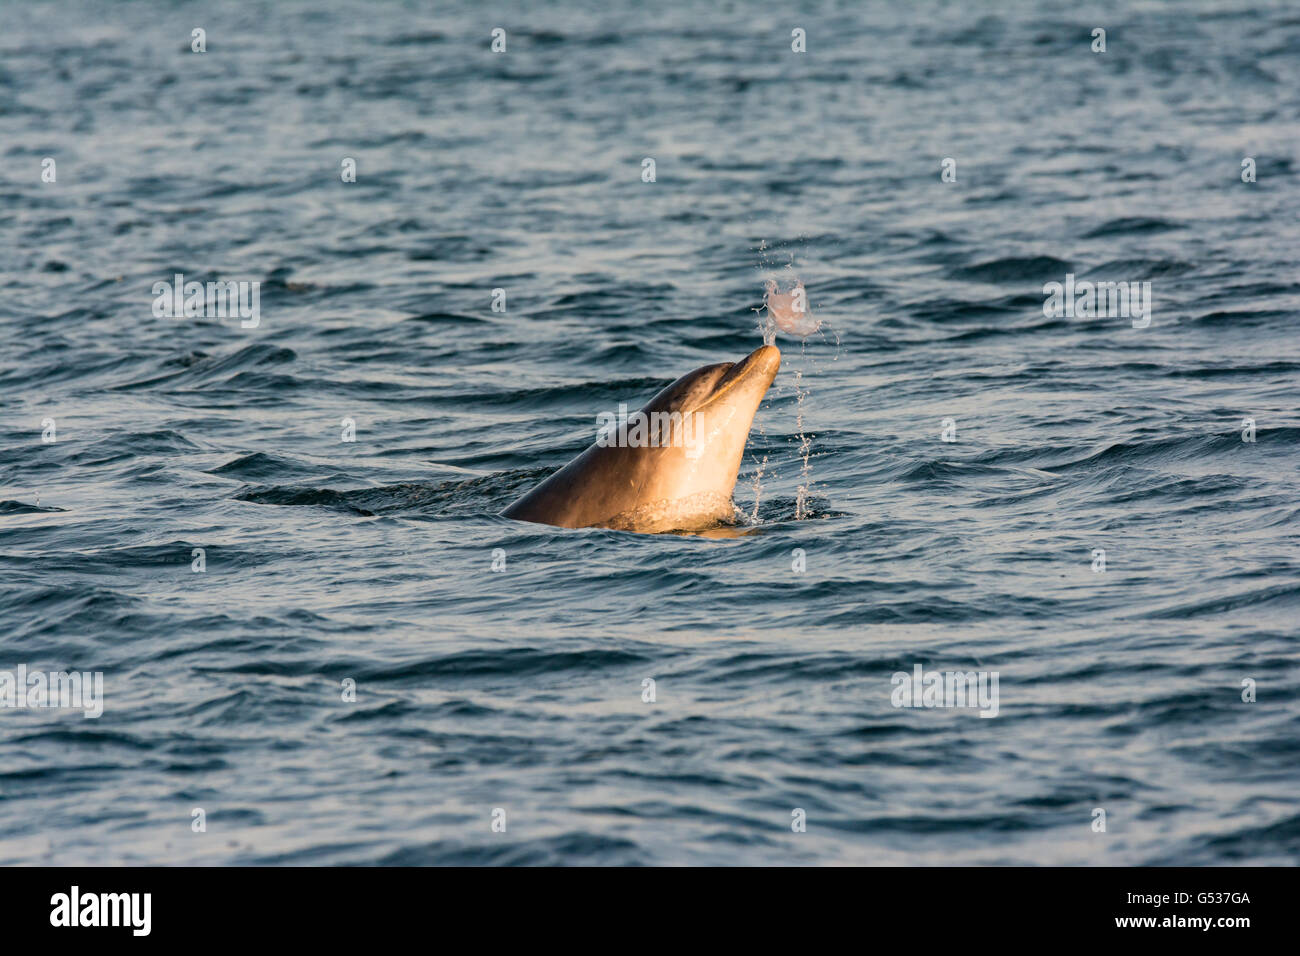 United Kingdom, Scotland, Highland, Fortrose, Chanonry Point, Black Isle, Tursiops swimming, Bottlenose Dolphins playing with a jellyfish Stock Photo